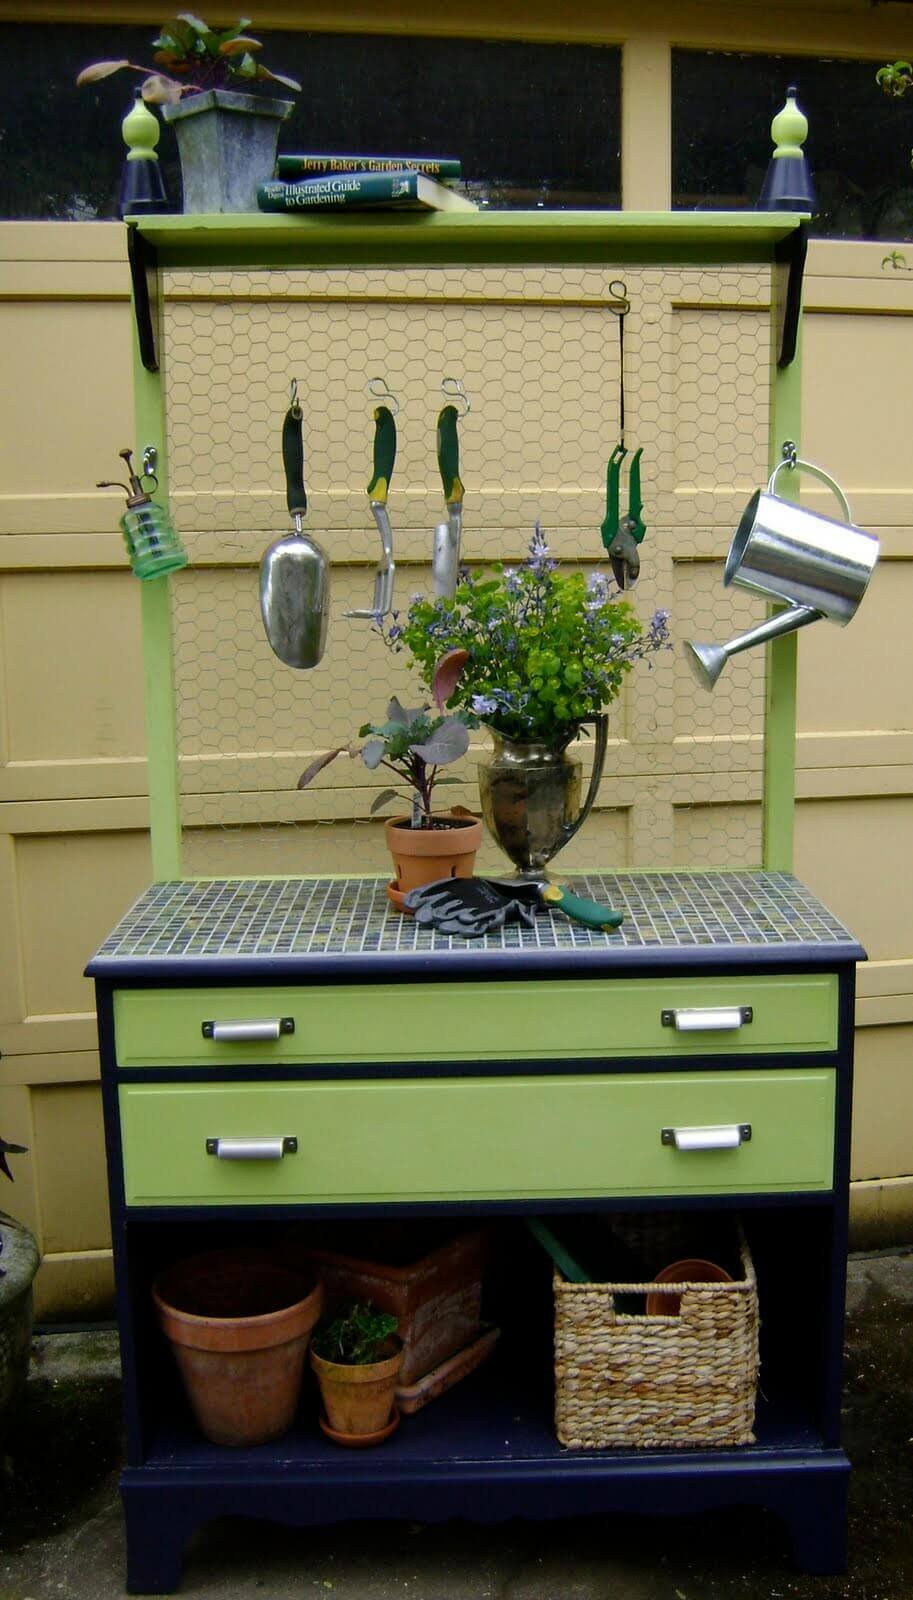 Tidy and Tiled Garden Tool Caddy